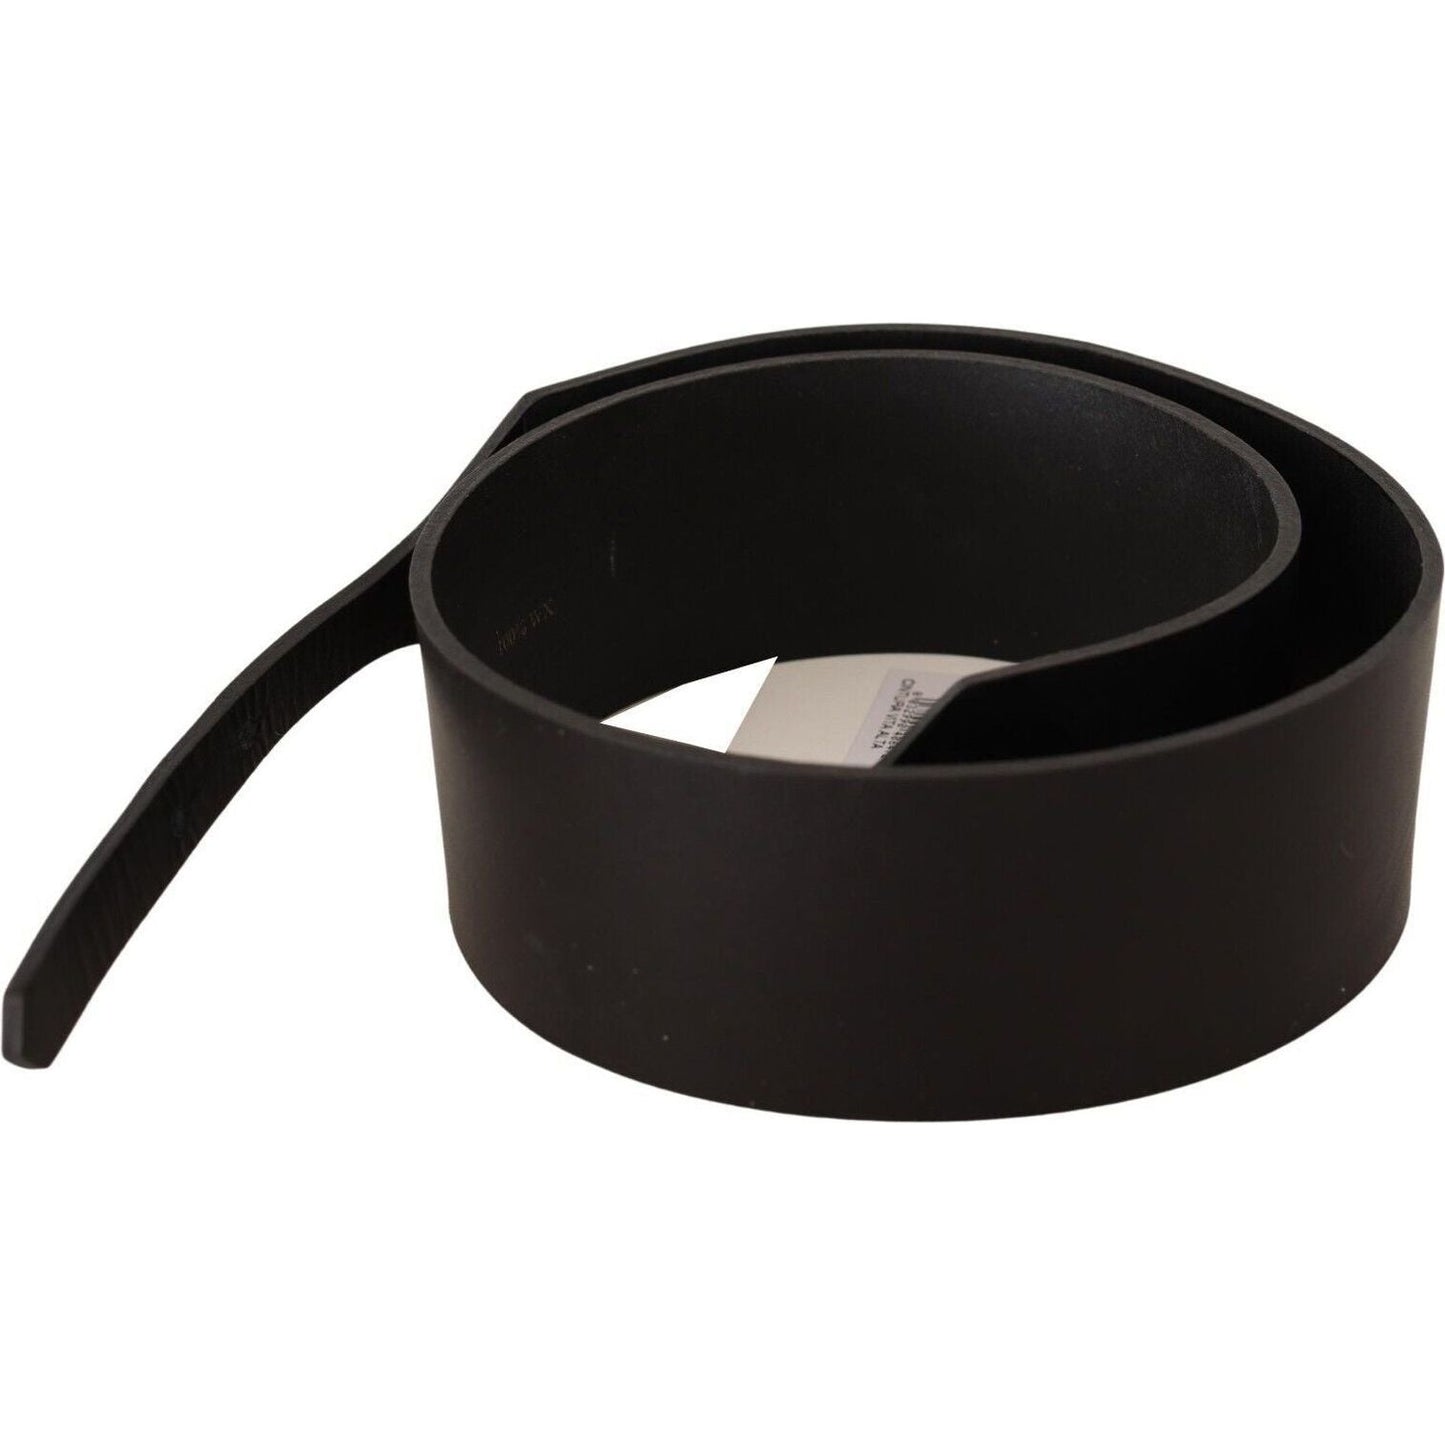 Costume National Black Leather Silver Round Buckle Belt black-leather-silver-round-buckle-belt s-l1600-1-0ce1623a-692.jpg